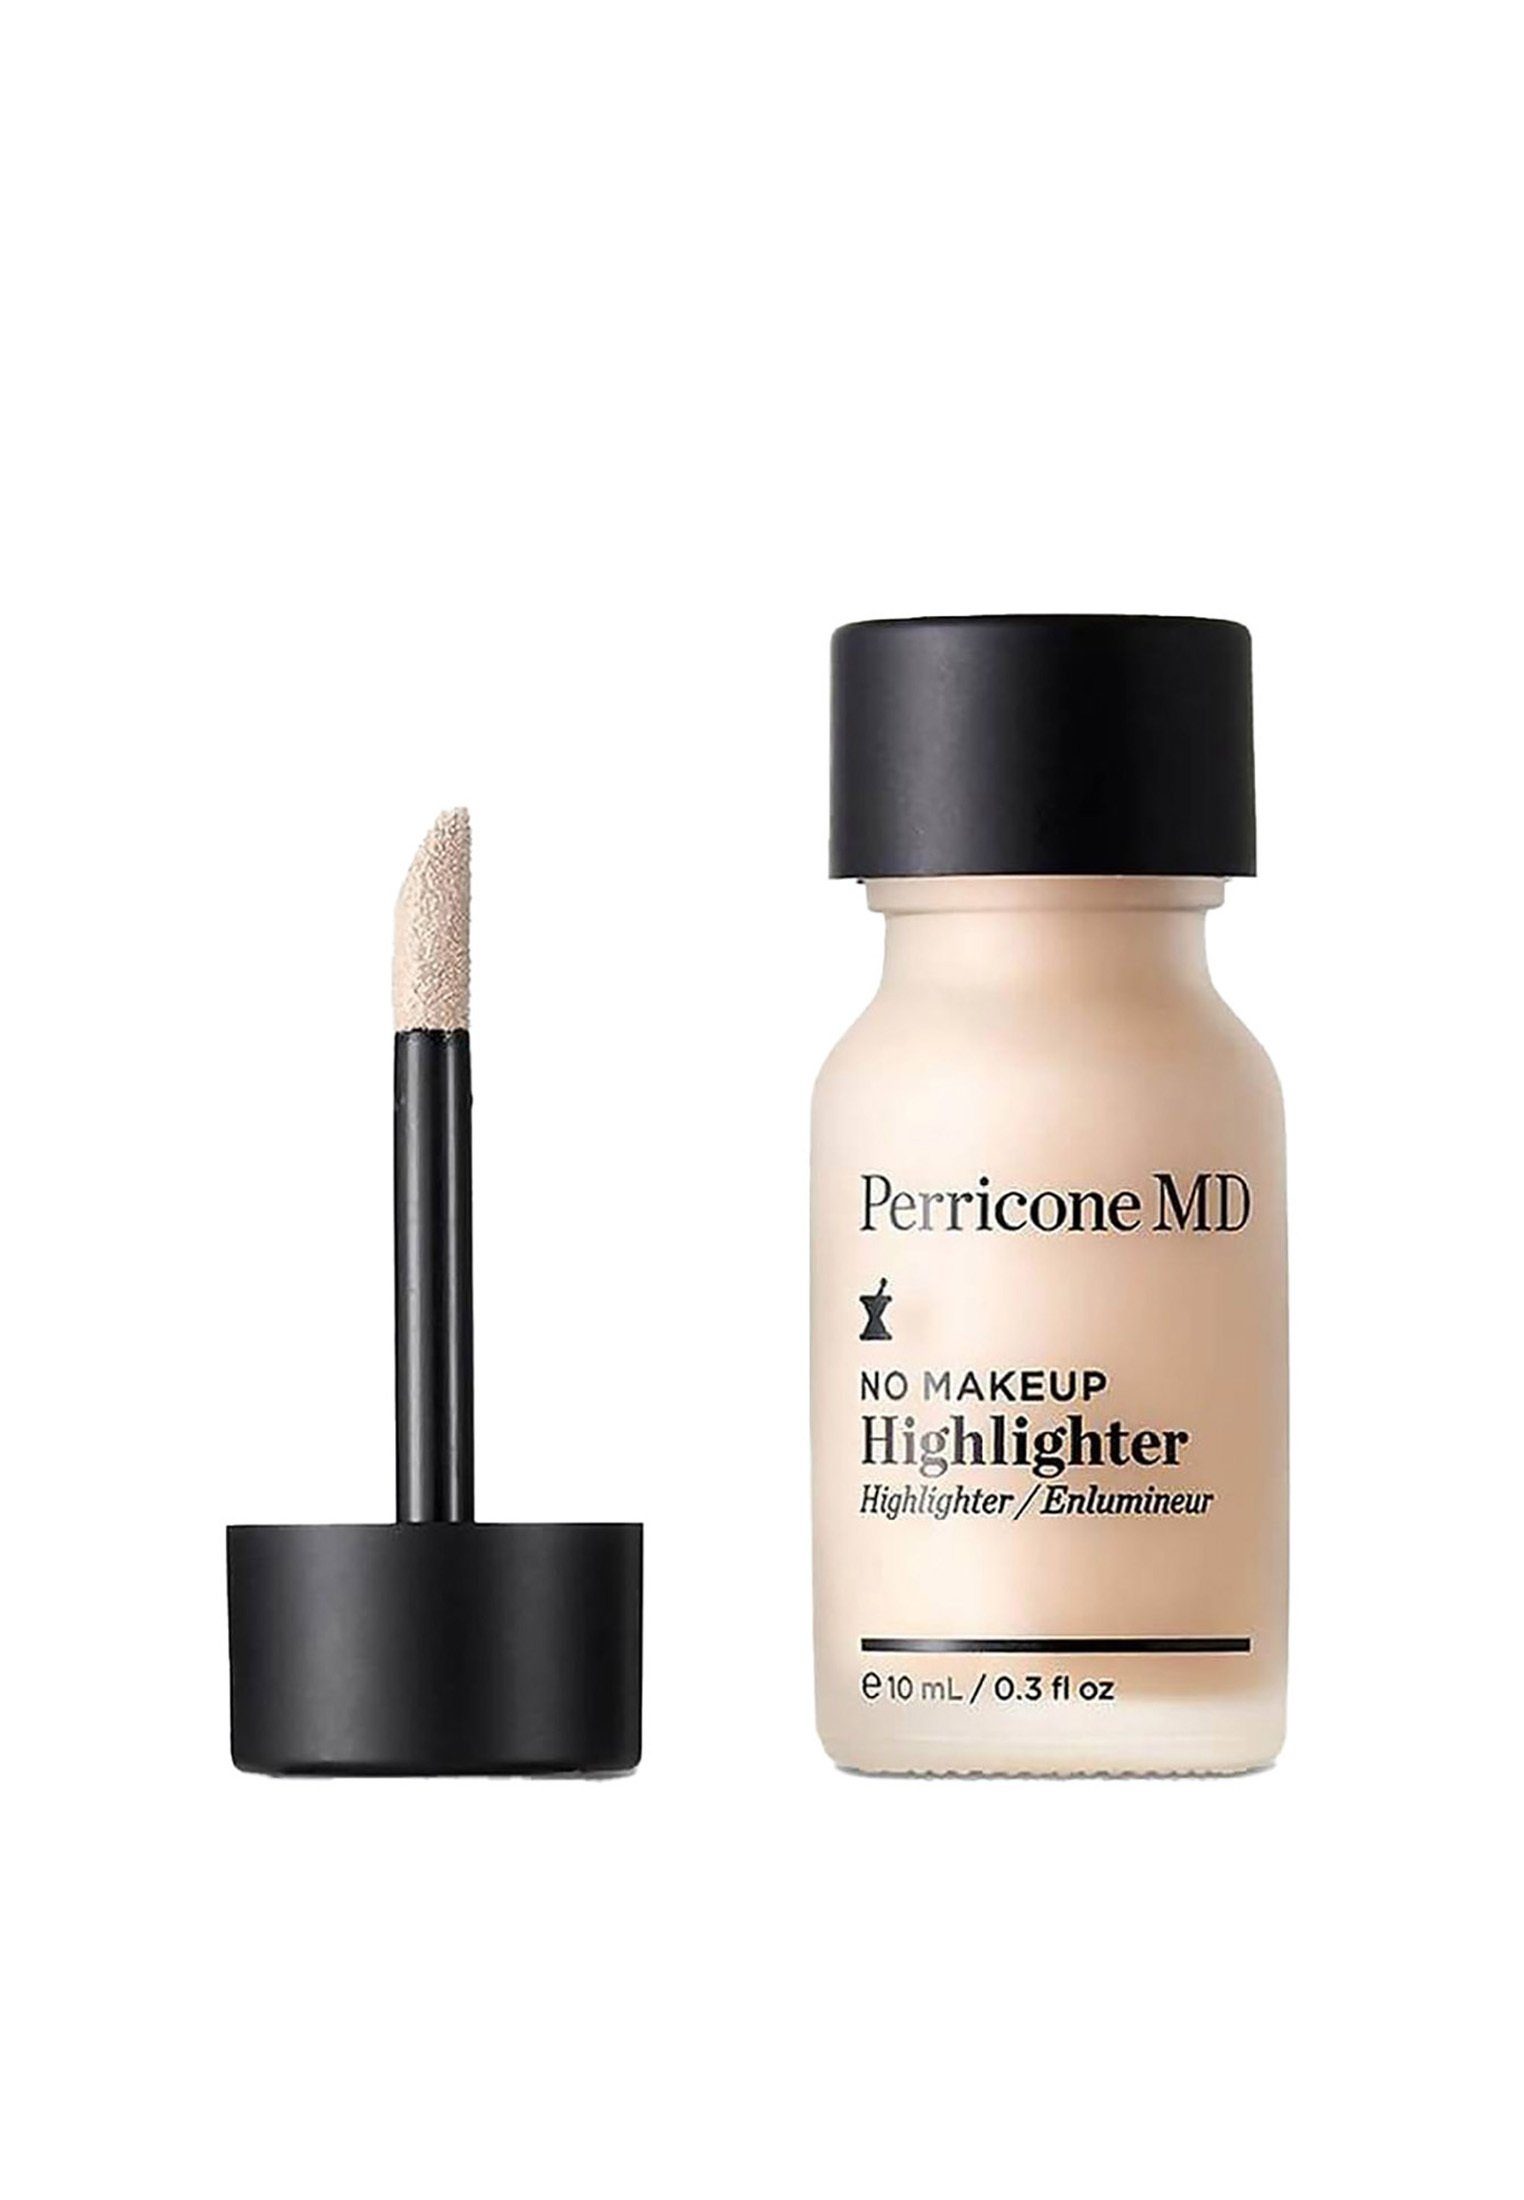 Makeup Highlighter Highlighter Highlighter PERRICONE No PERRICONE